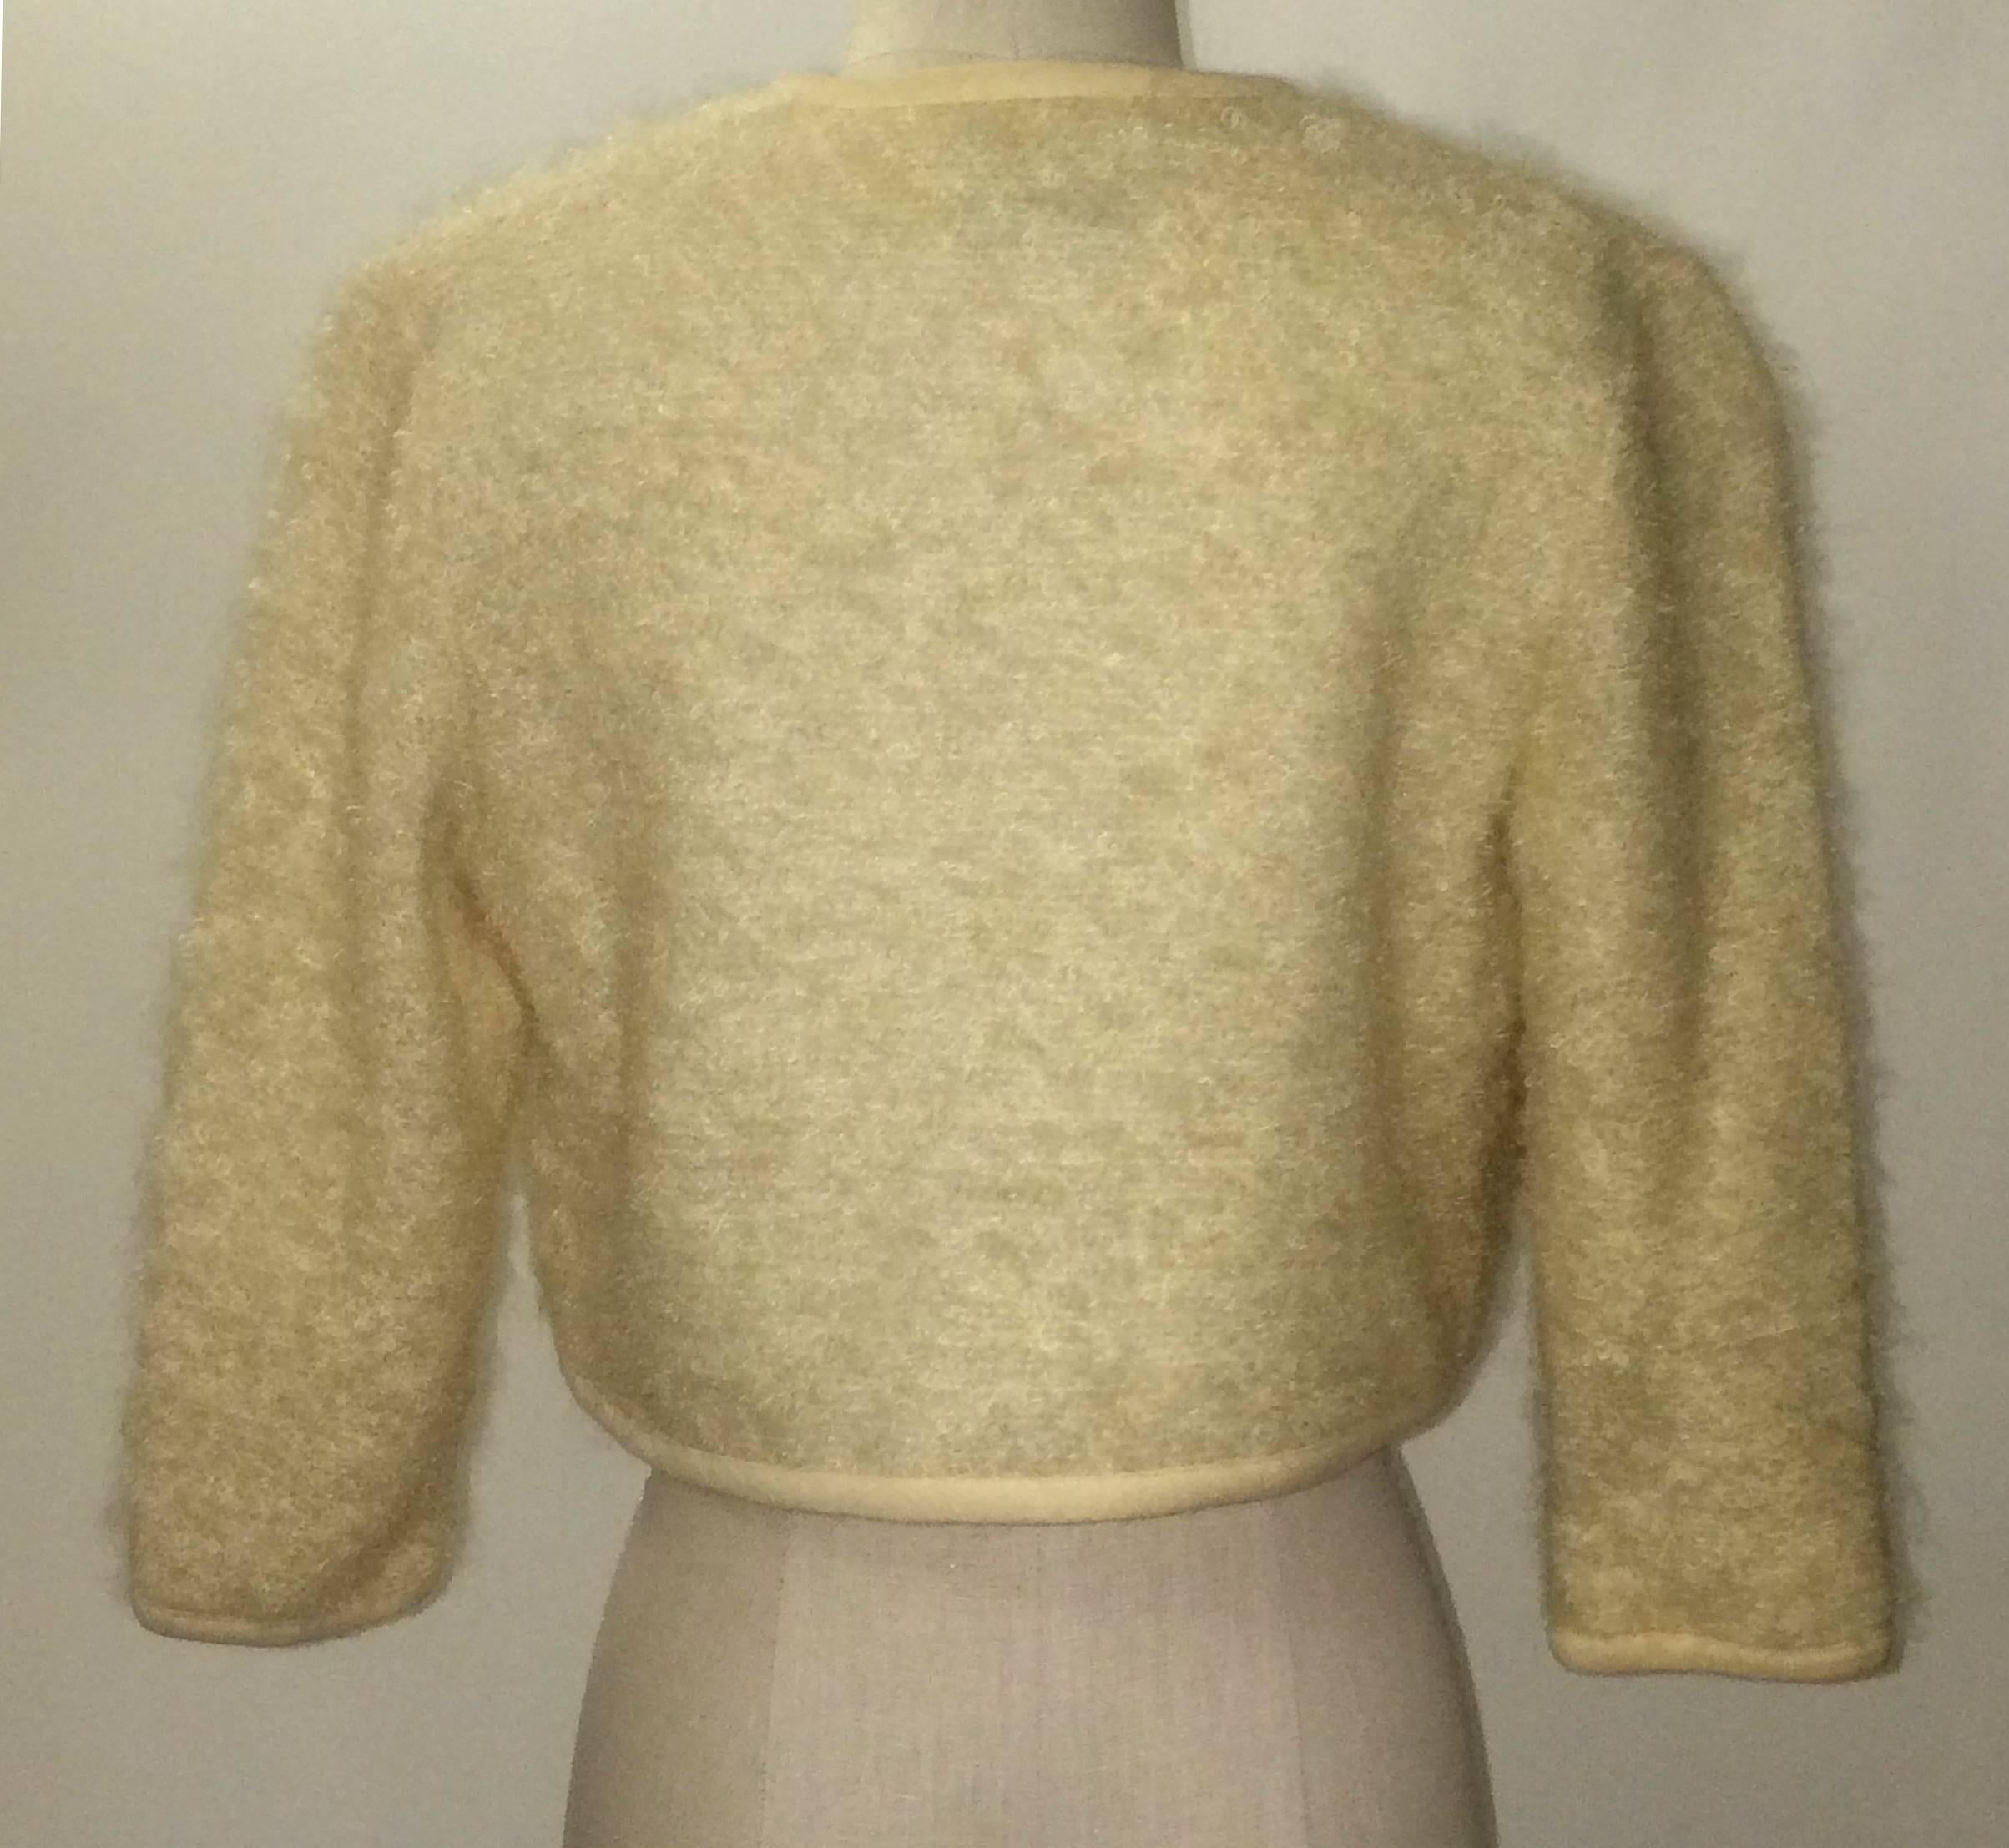 Saks Fifth Avenue (Juniorette Shop) cream fuzzy knit sweater with little pink yarn embroidered flowers throughout front. Fully lined. 

Content unknown. 

No size tag, best fits size XS-S, see measurements (taken open and flat.) 
Bust